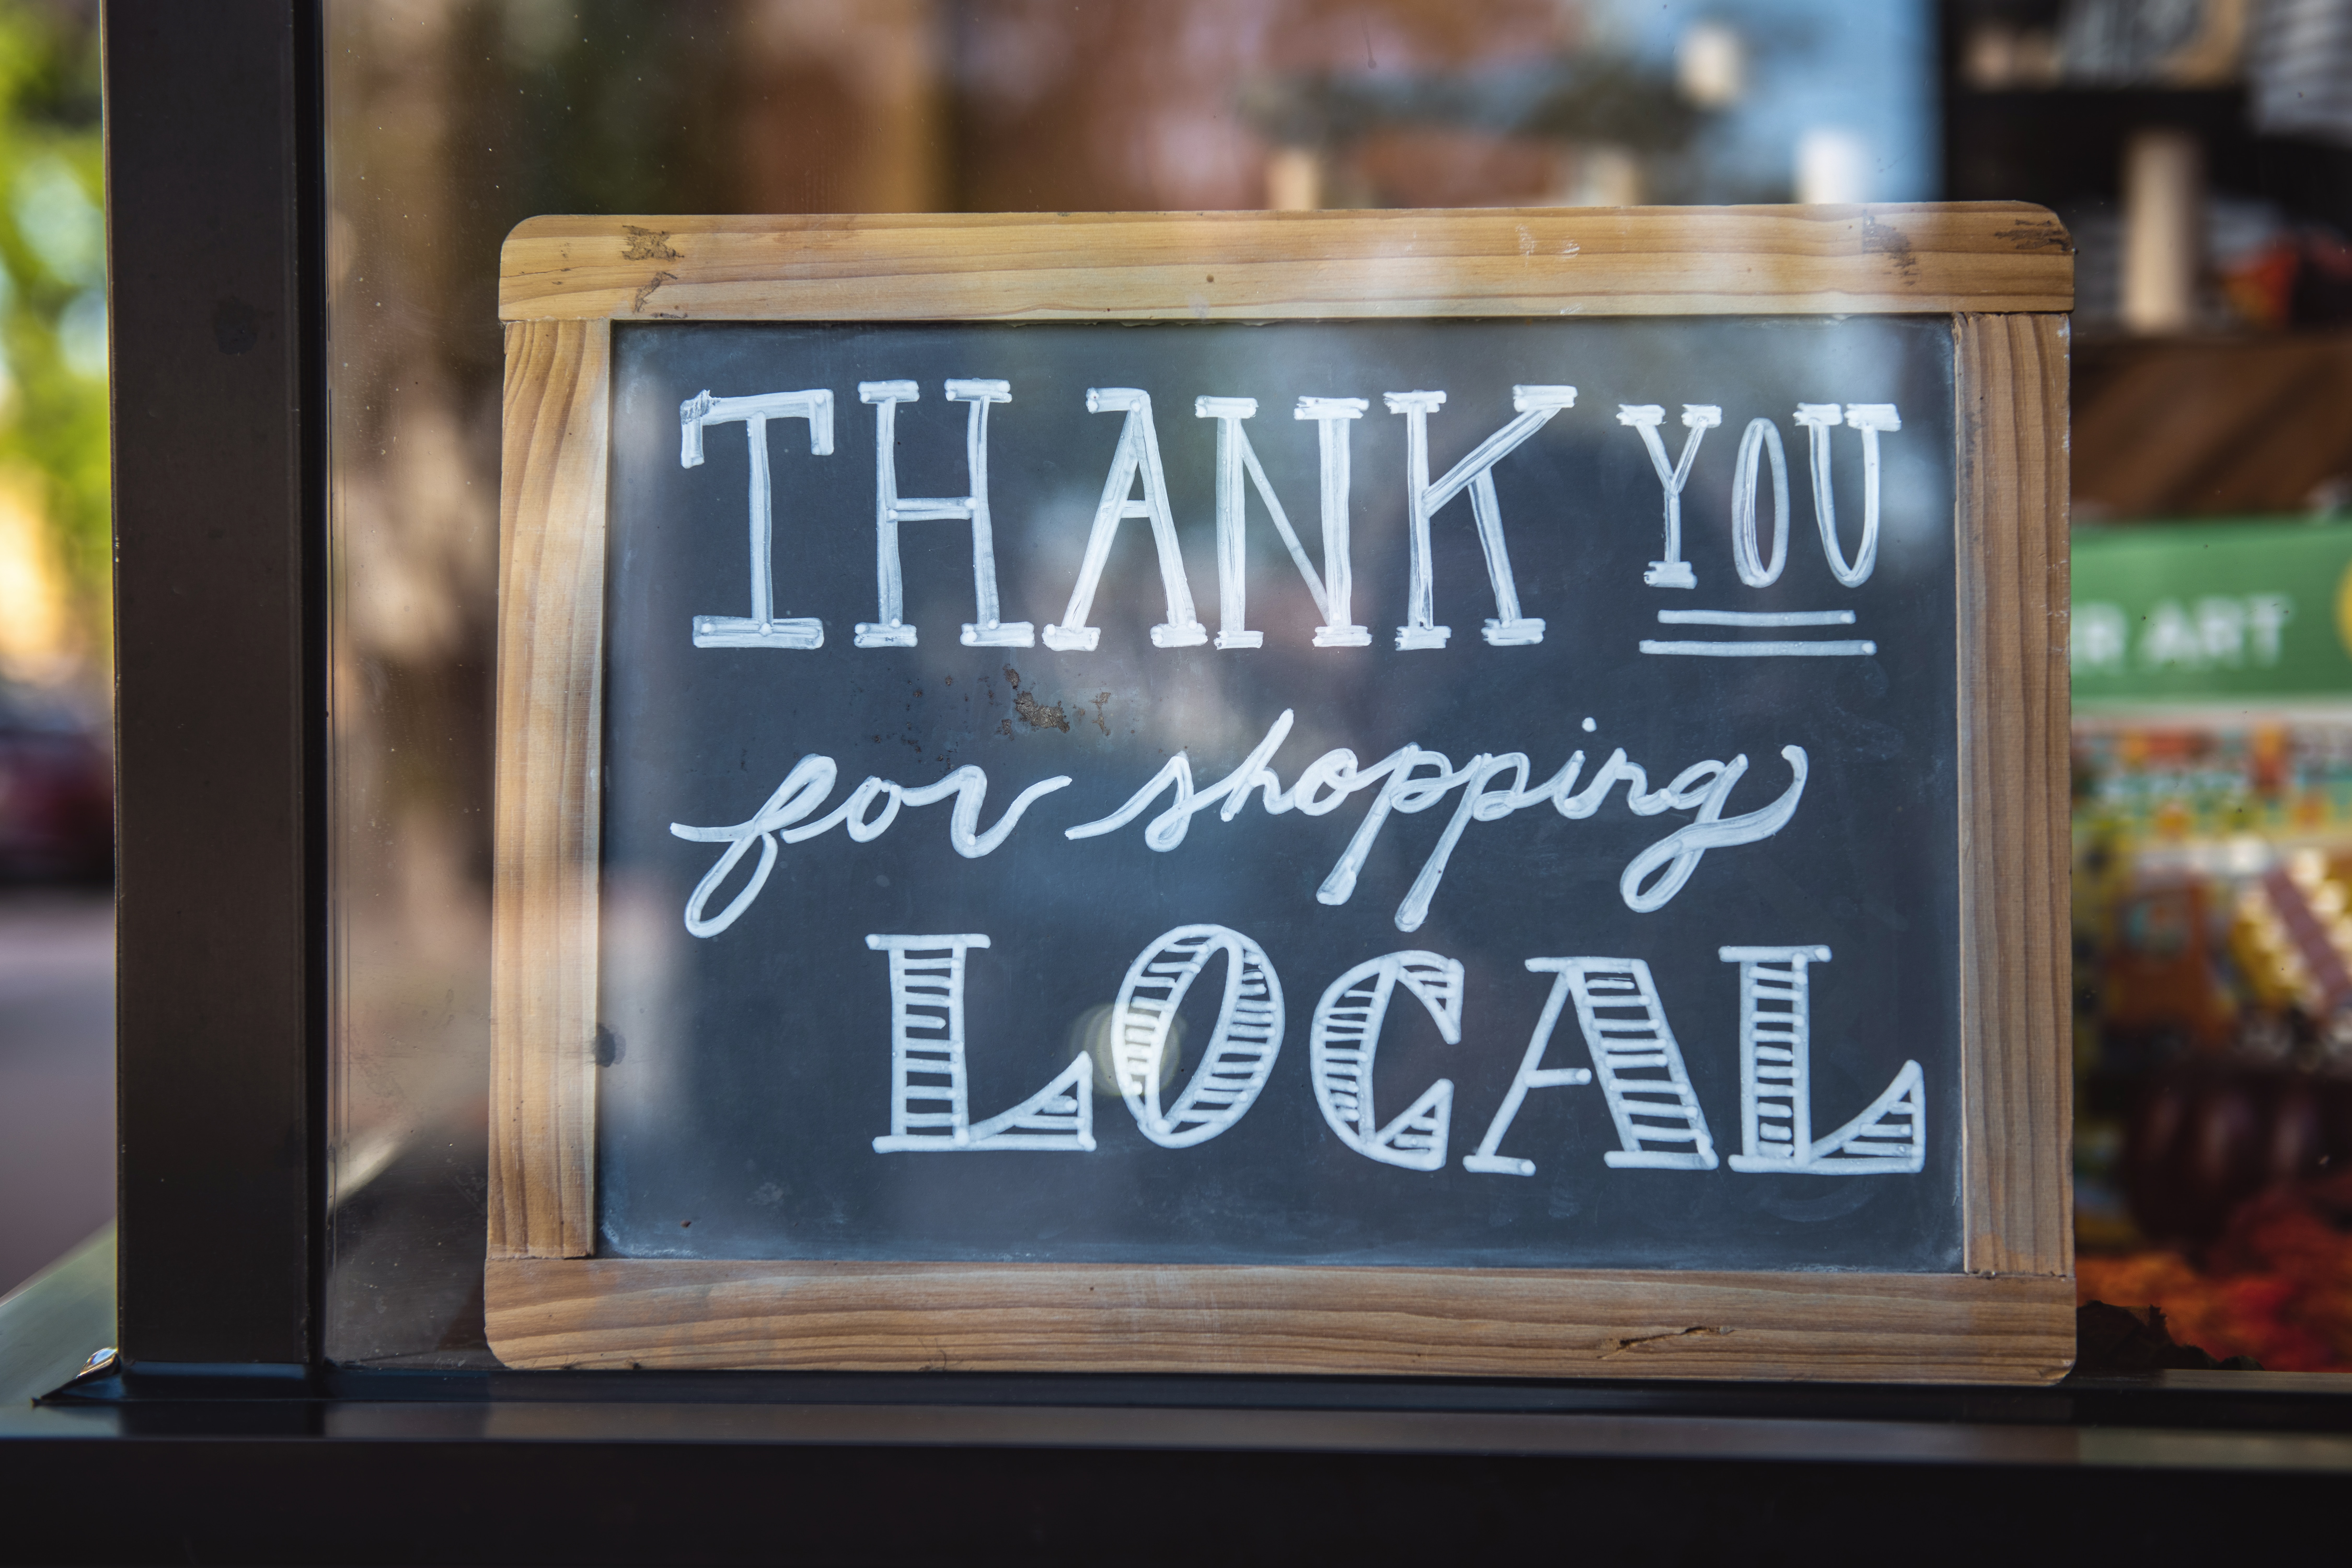 The power of local business